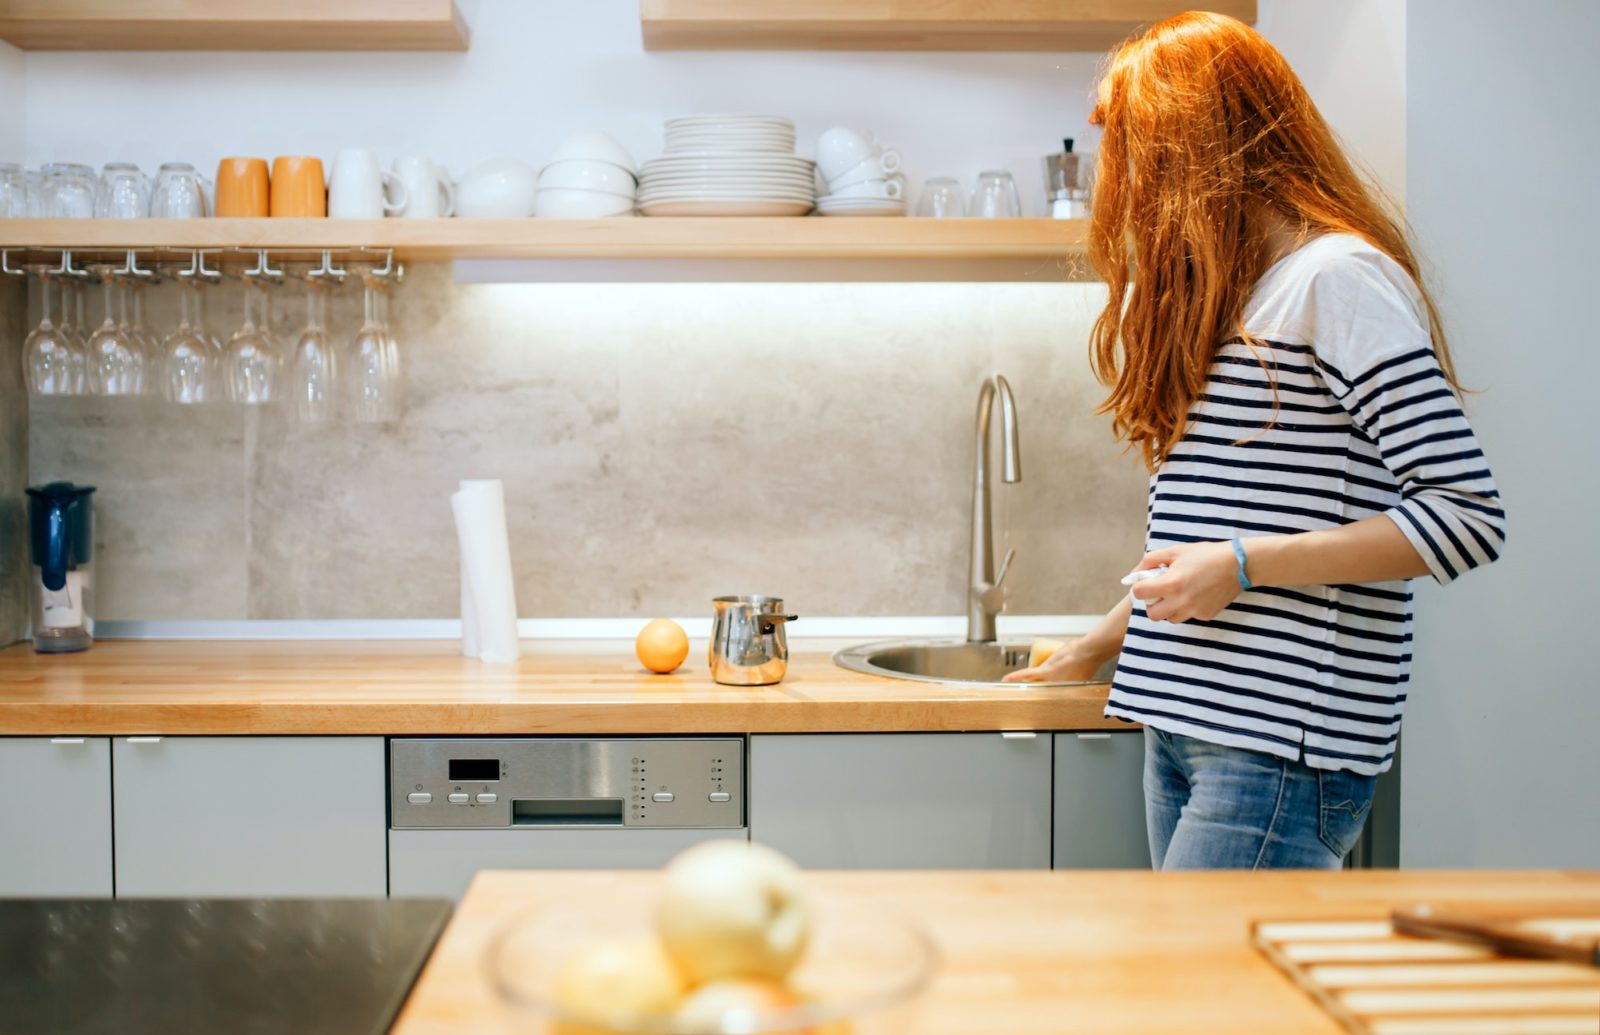 Woman keeping kitchen tidy and clean